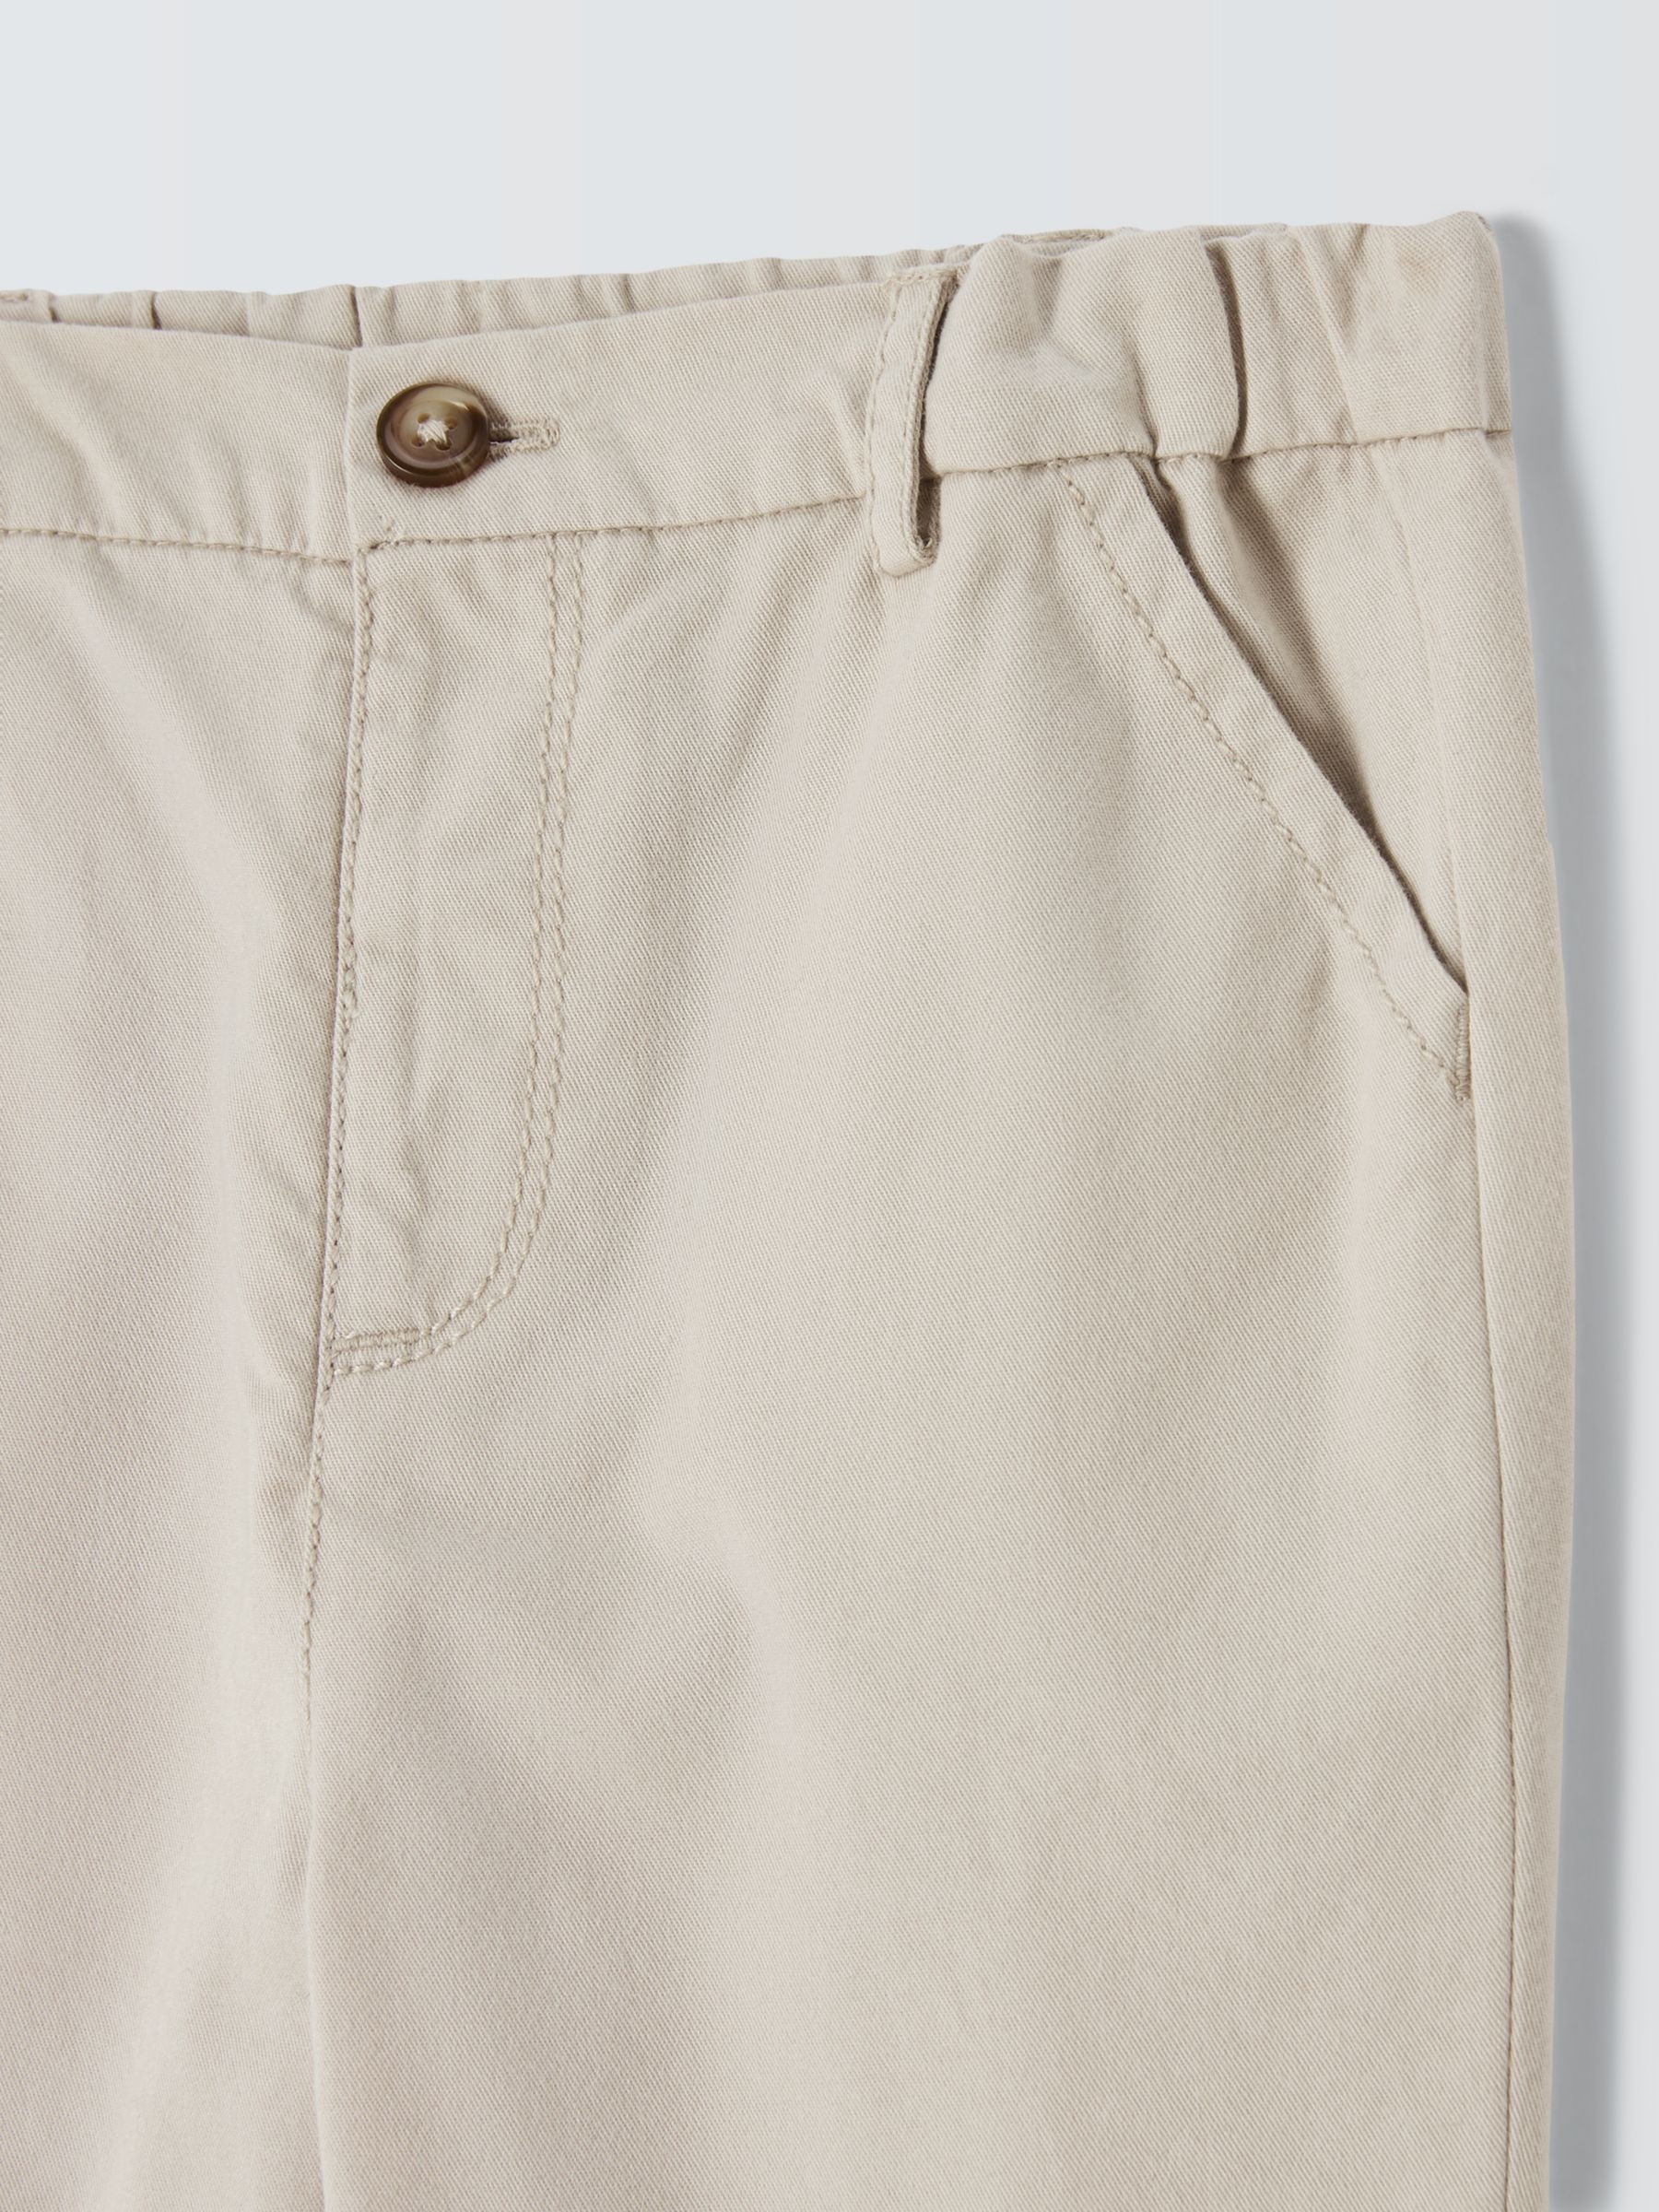 Buy John Lewis Heirloom Collection Baby Straight Leg Chinos Online at johnlewis.com